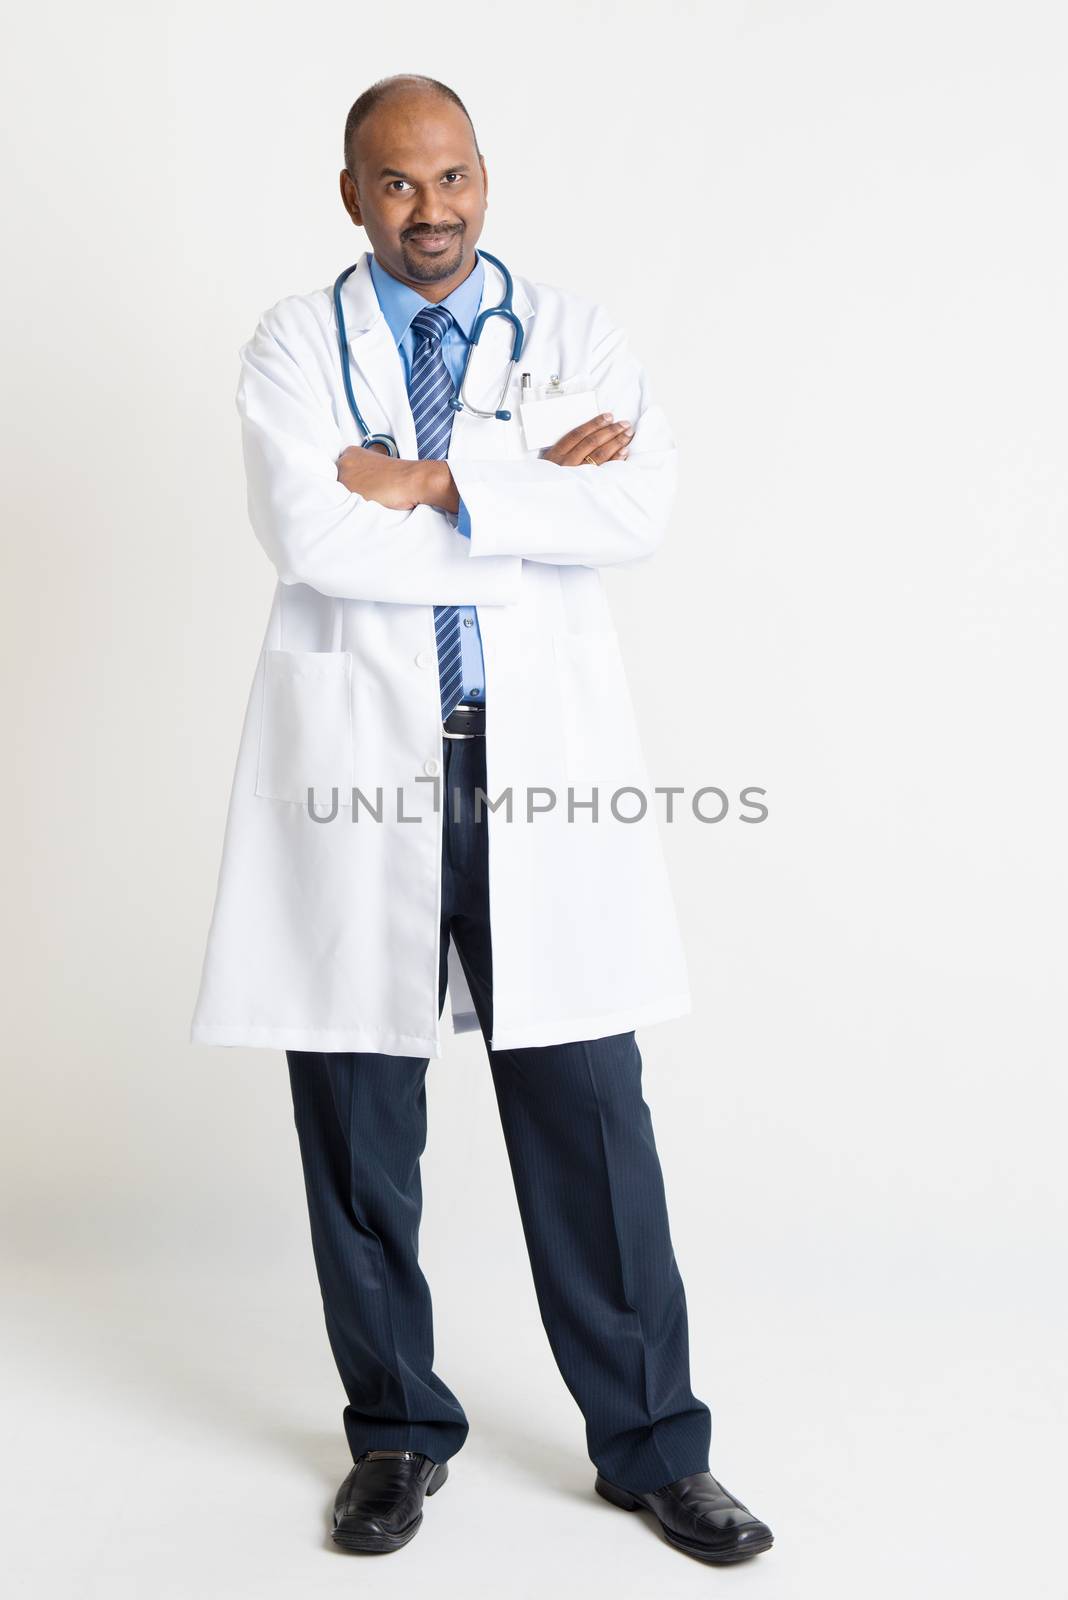 Full length mature Indian male medical doctor in uniform arms crossed standing on plain background with shadow.